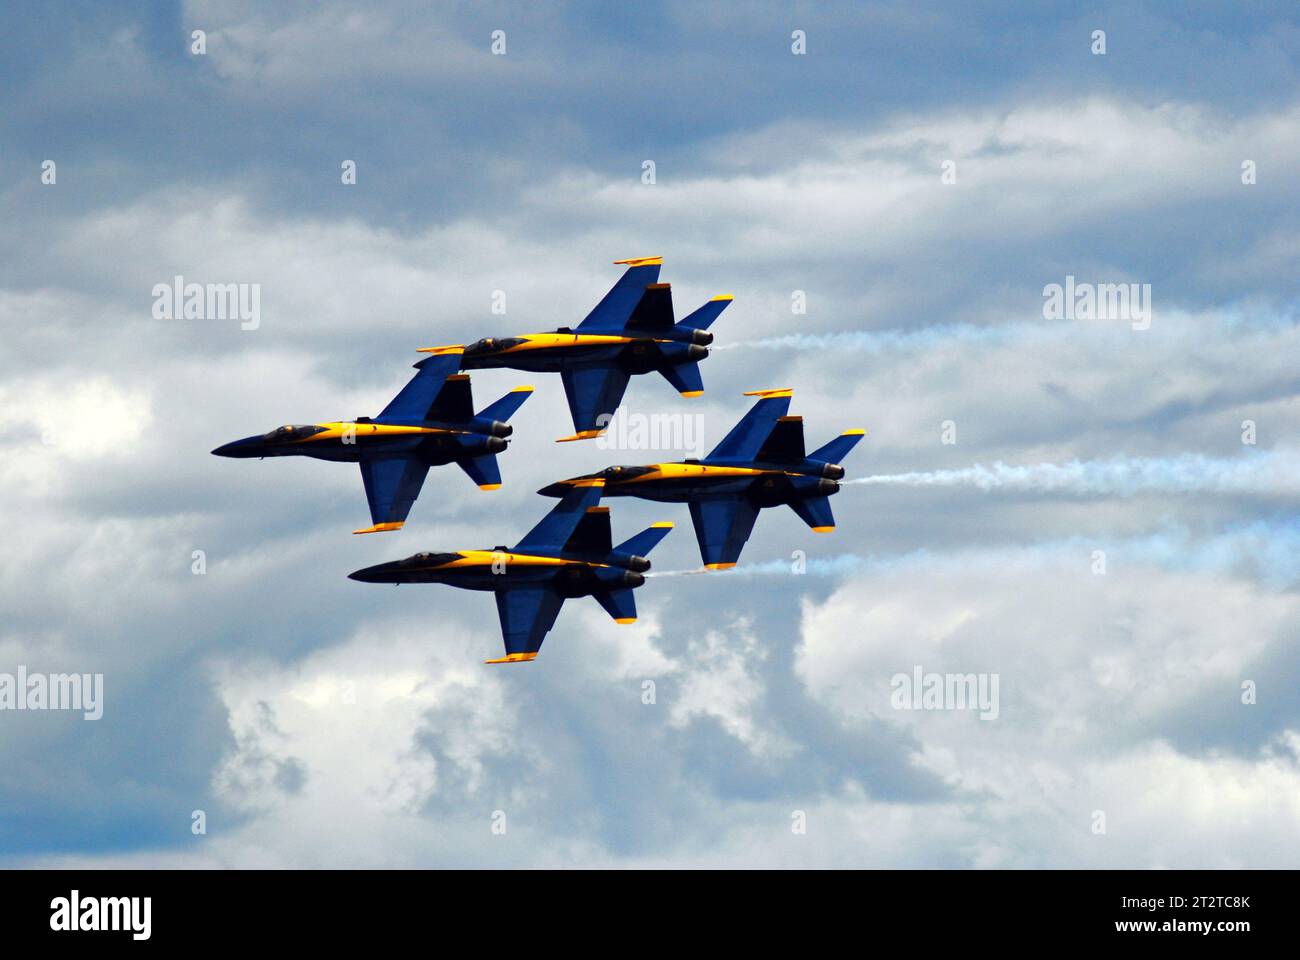 A group of four Blue Angels jet planes fly close together in a diamond formation at an airshow Stock Photo